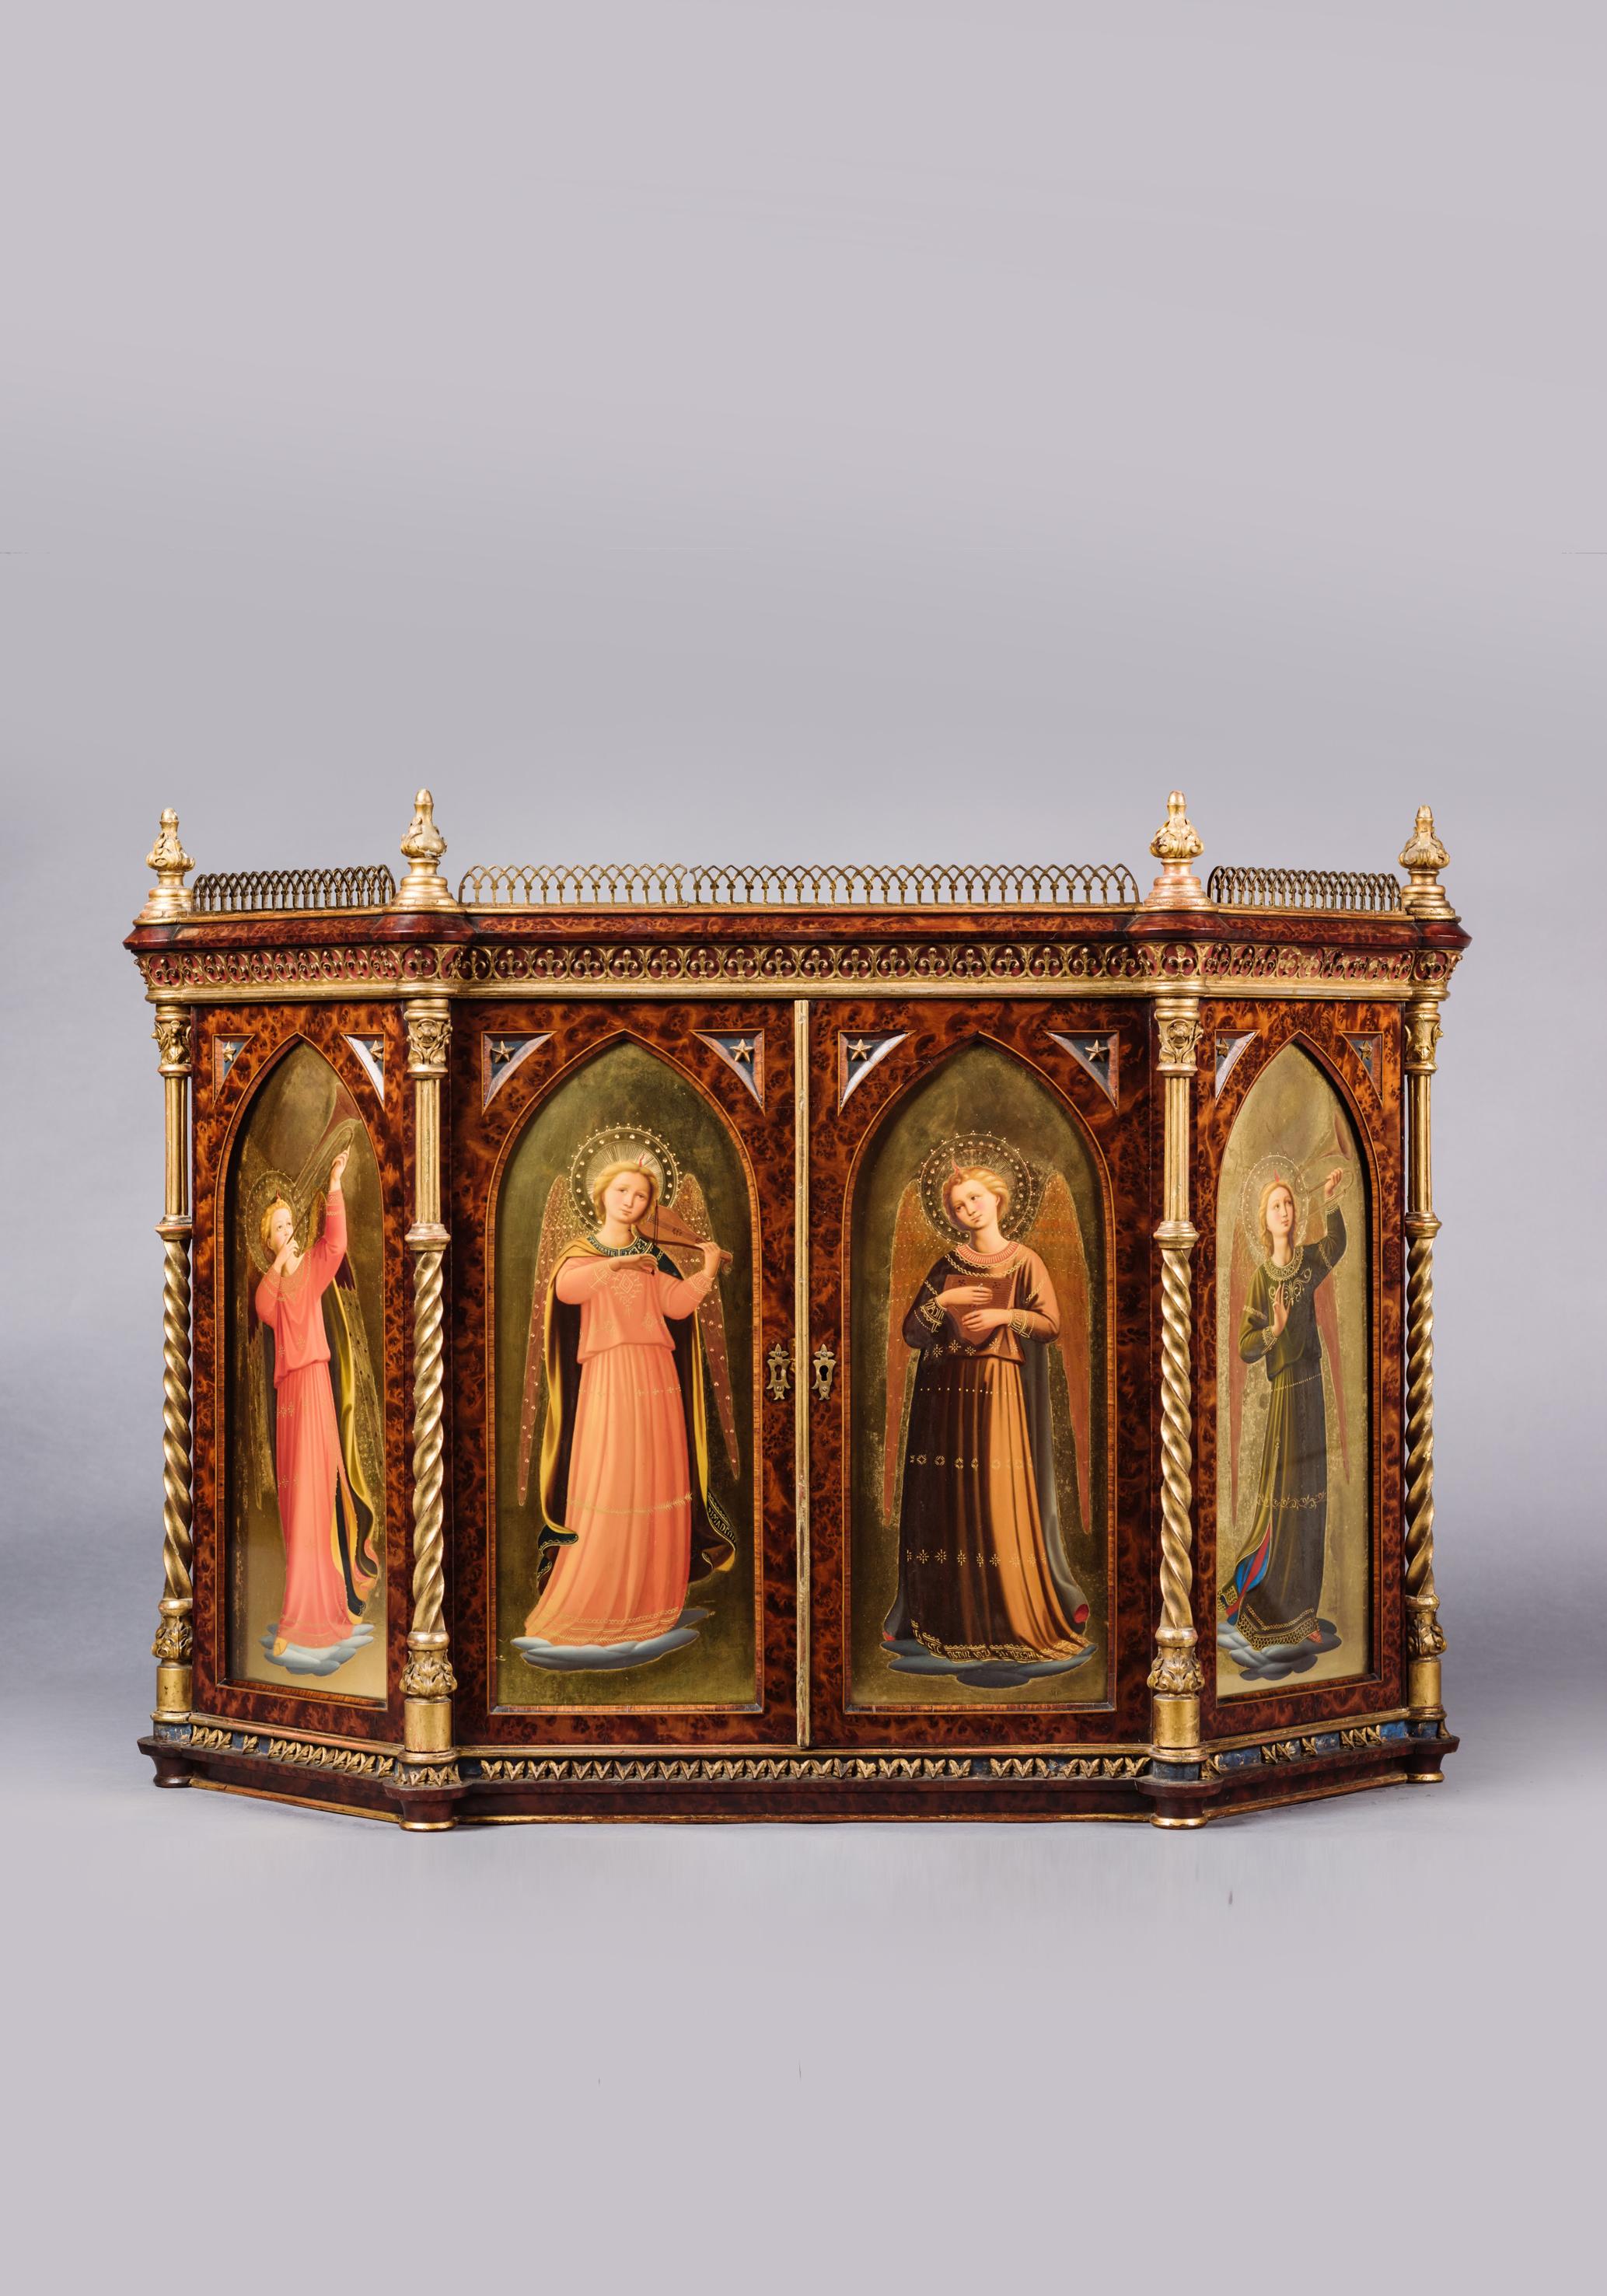 An Italian renaissance revival burr yew wood and parcel-gilt painted table cabinet, by Raphaello Cipriani.

Italian, circa 1870.

The cabinet is inscribed on the back, RAFFAELLO Cipriani FECE VIA DI BARDI 334 FIRENZE.
  